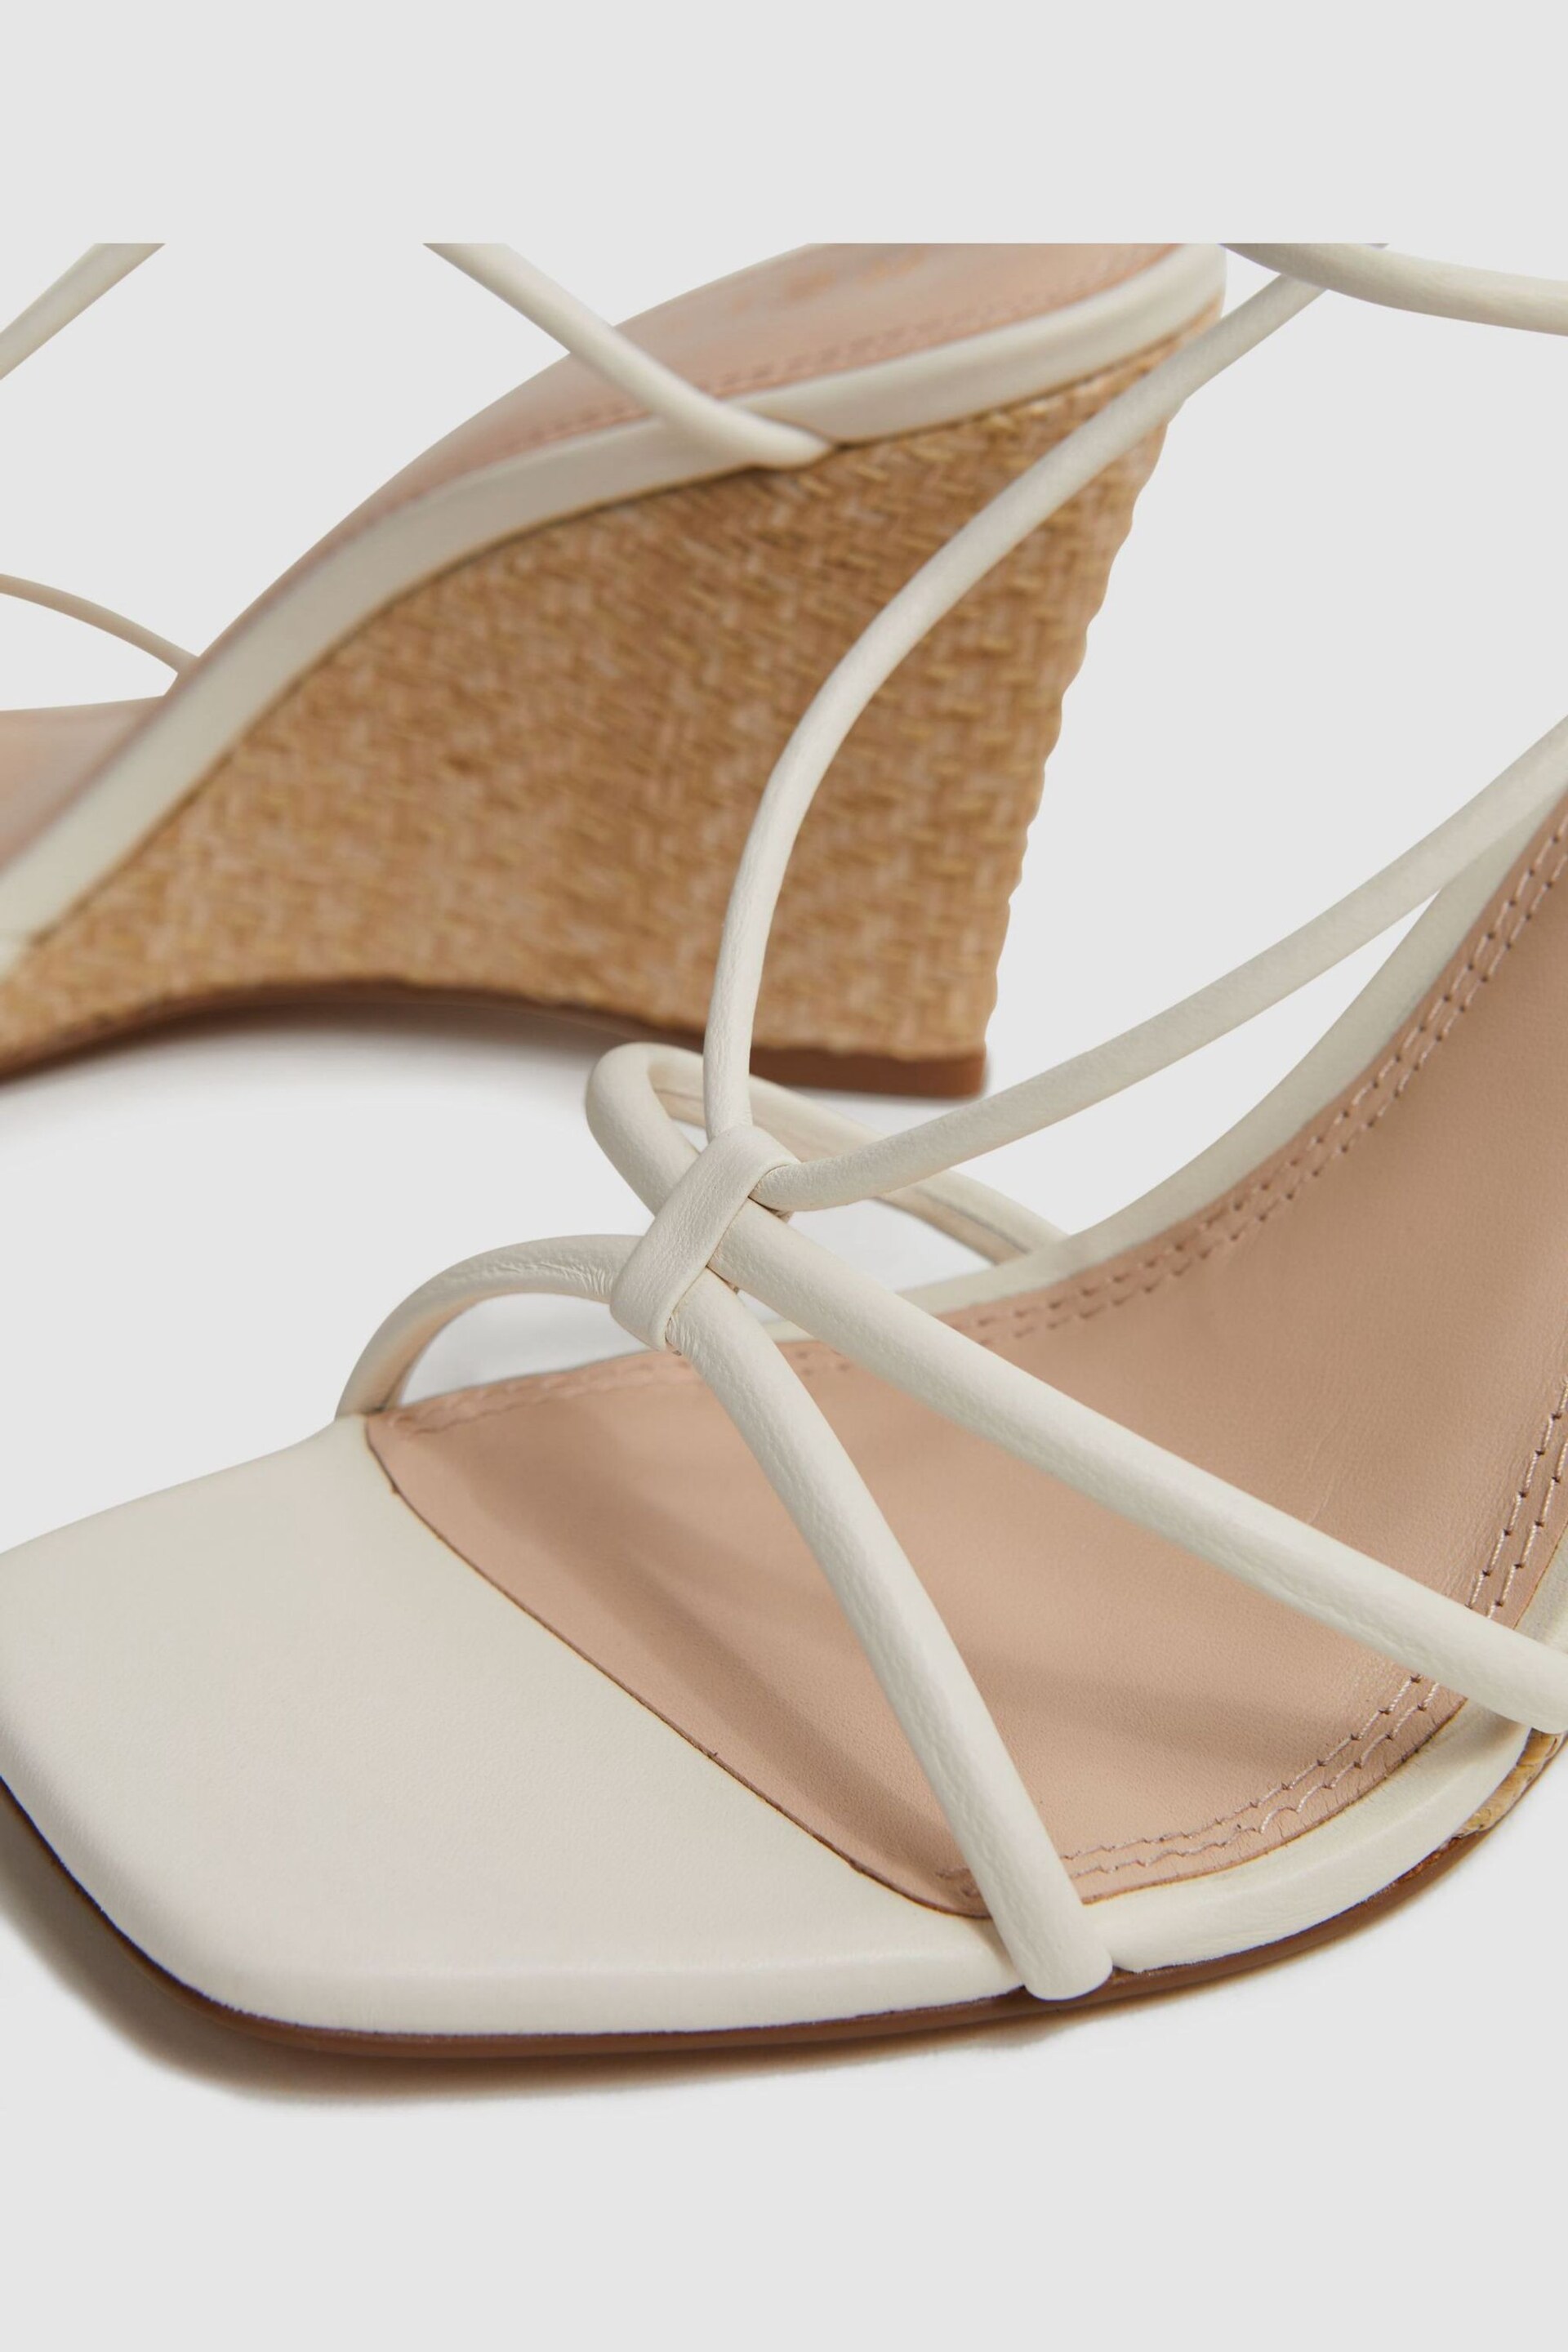 Reiss Off White Daisey Strappy Wedge Heels - Image 5 of 5